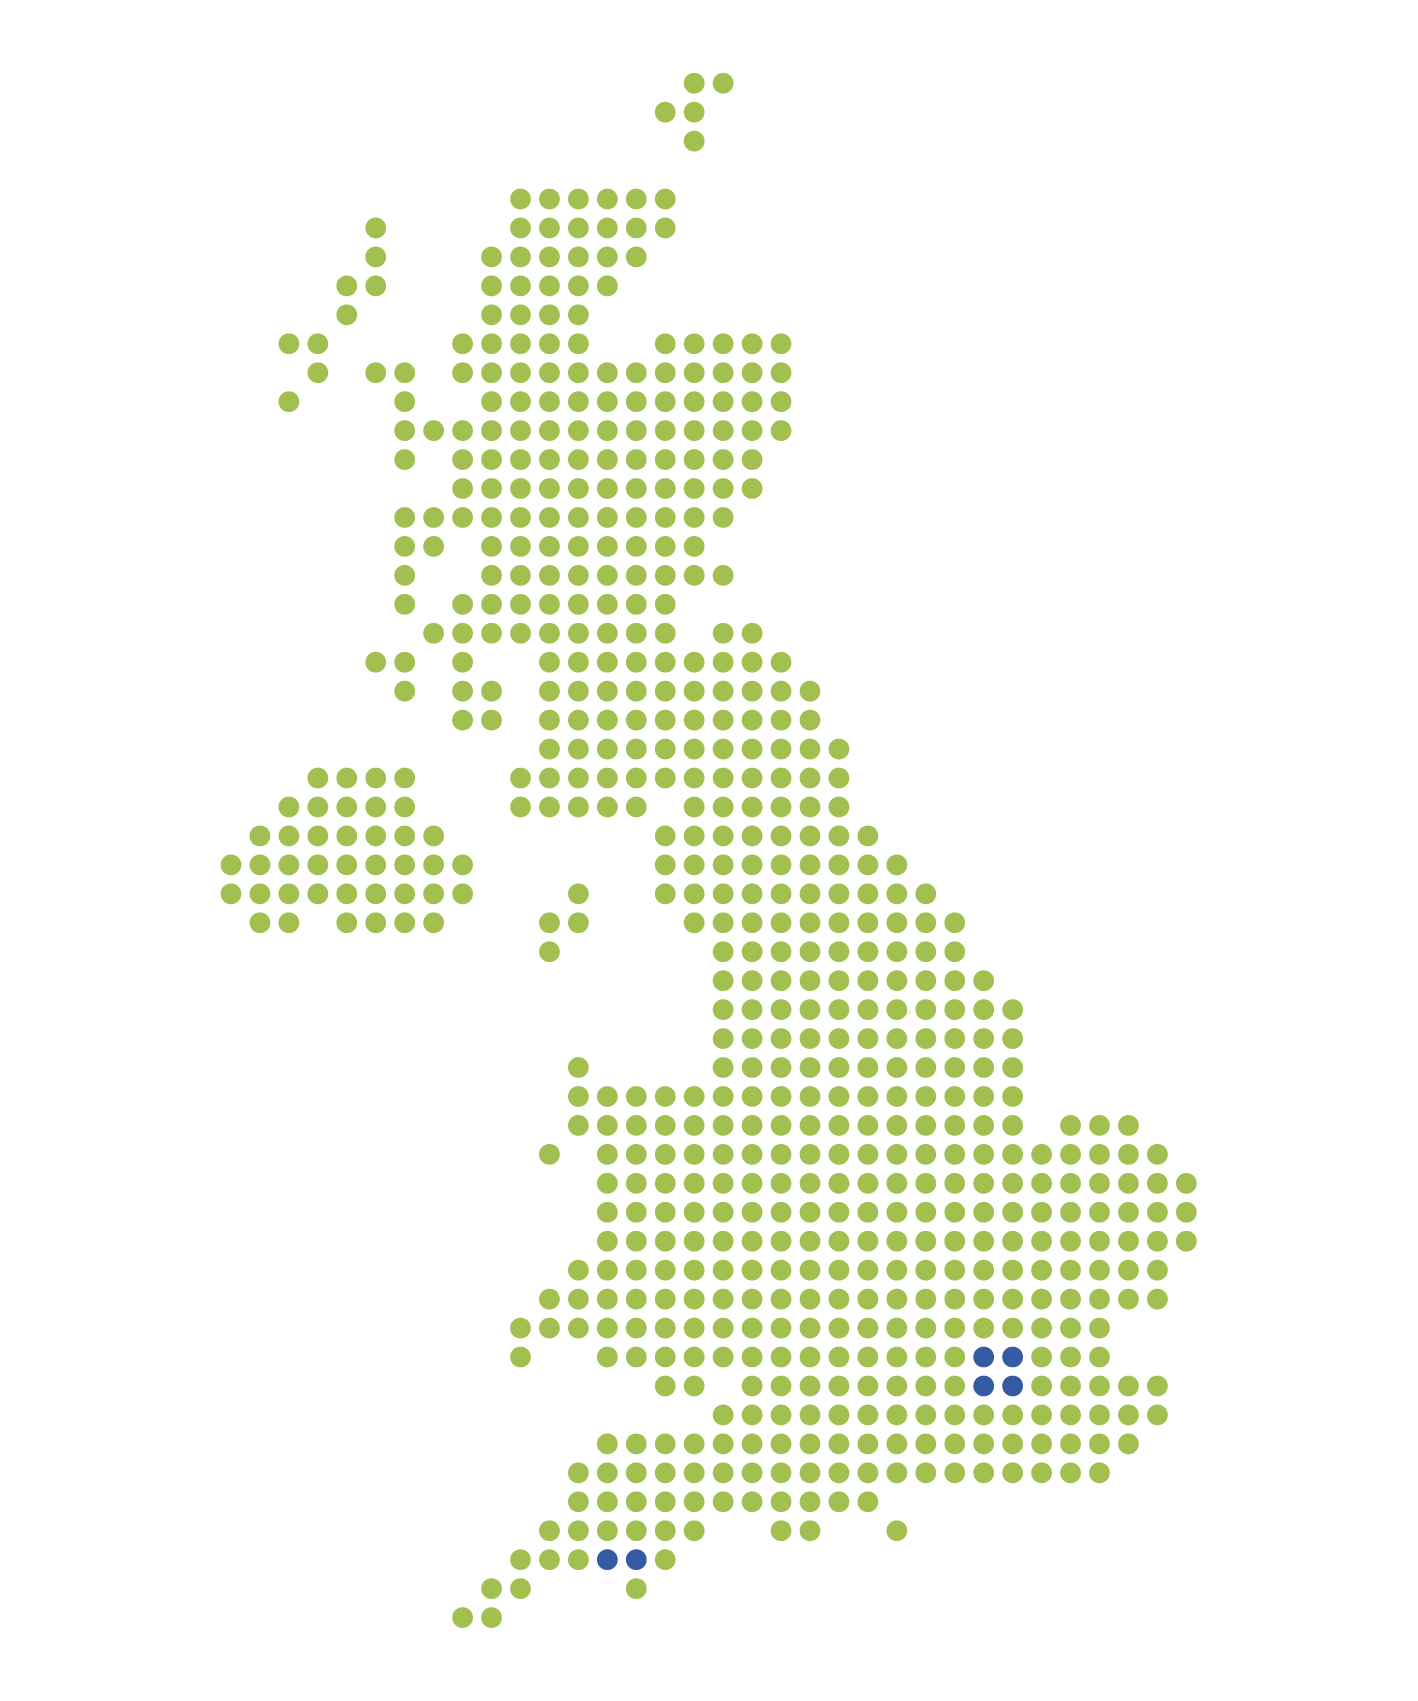 Map of UK made up of green and dark blue dots